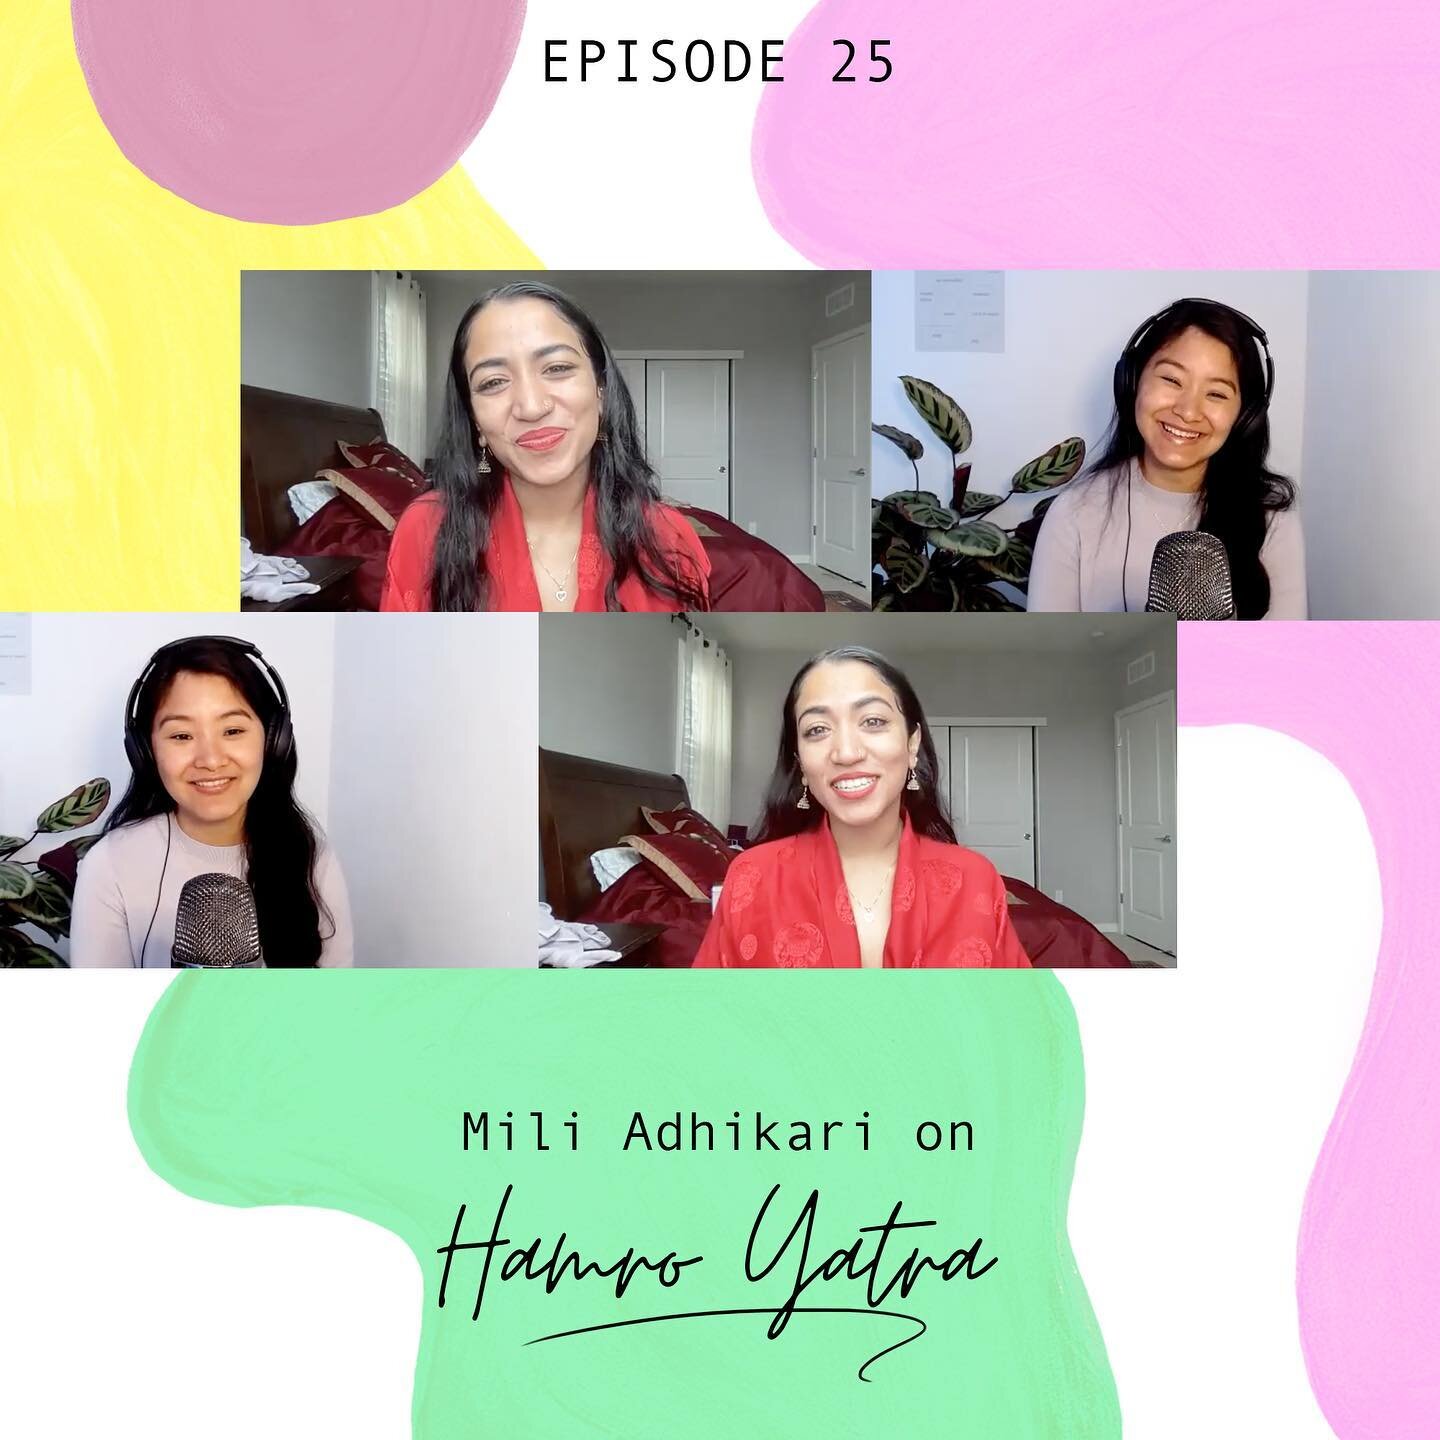 We are back with episode 25!! We took a small hiatus to recharge ourselves &amp; got an exciting line up of guest for you guys! Firstly, this episode with @_milimoonbaby goes live Friday 25th June ✨ 

This conversation with @_milimoonbaby was so ener